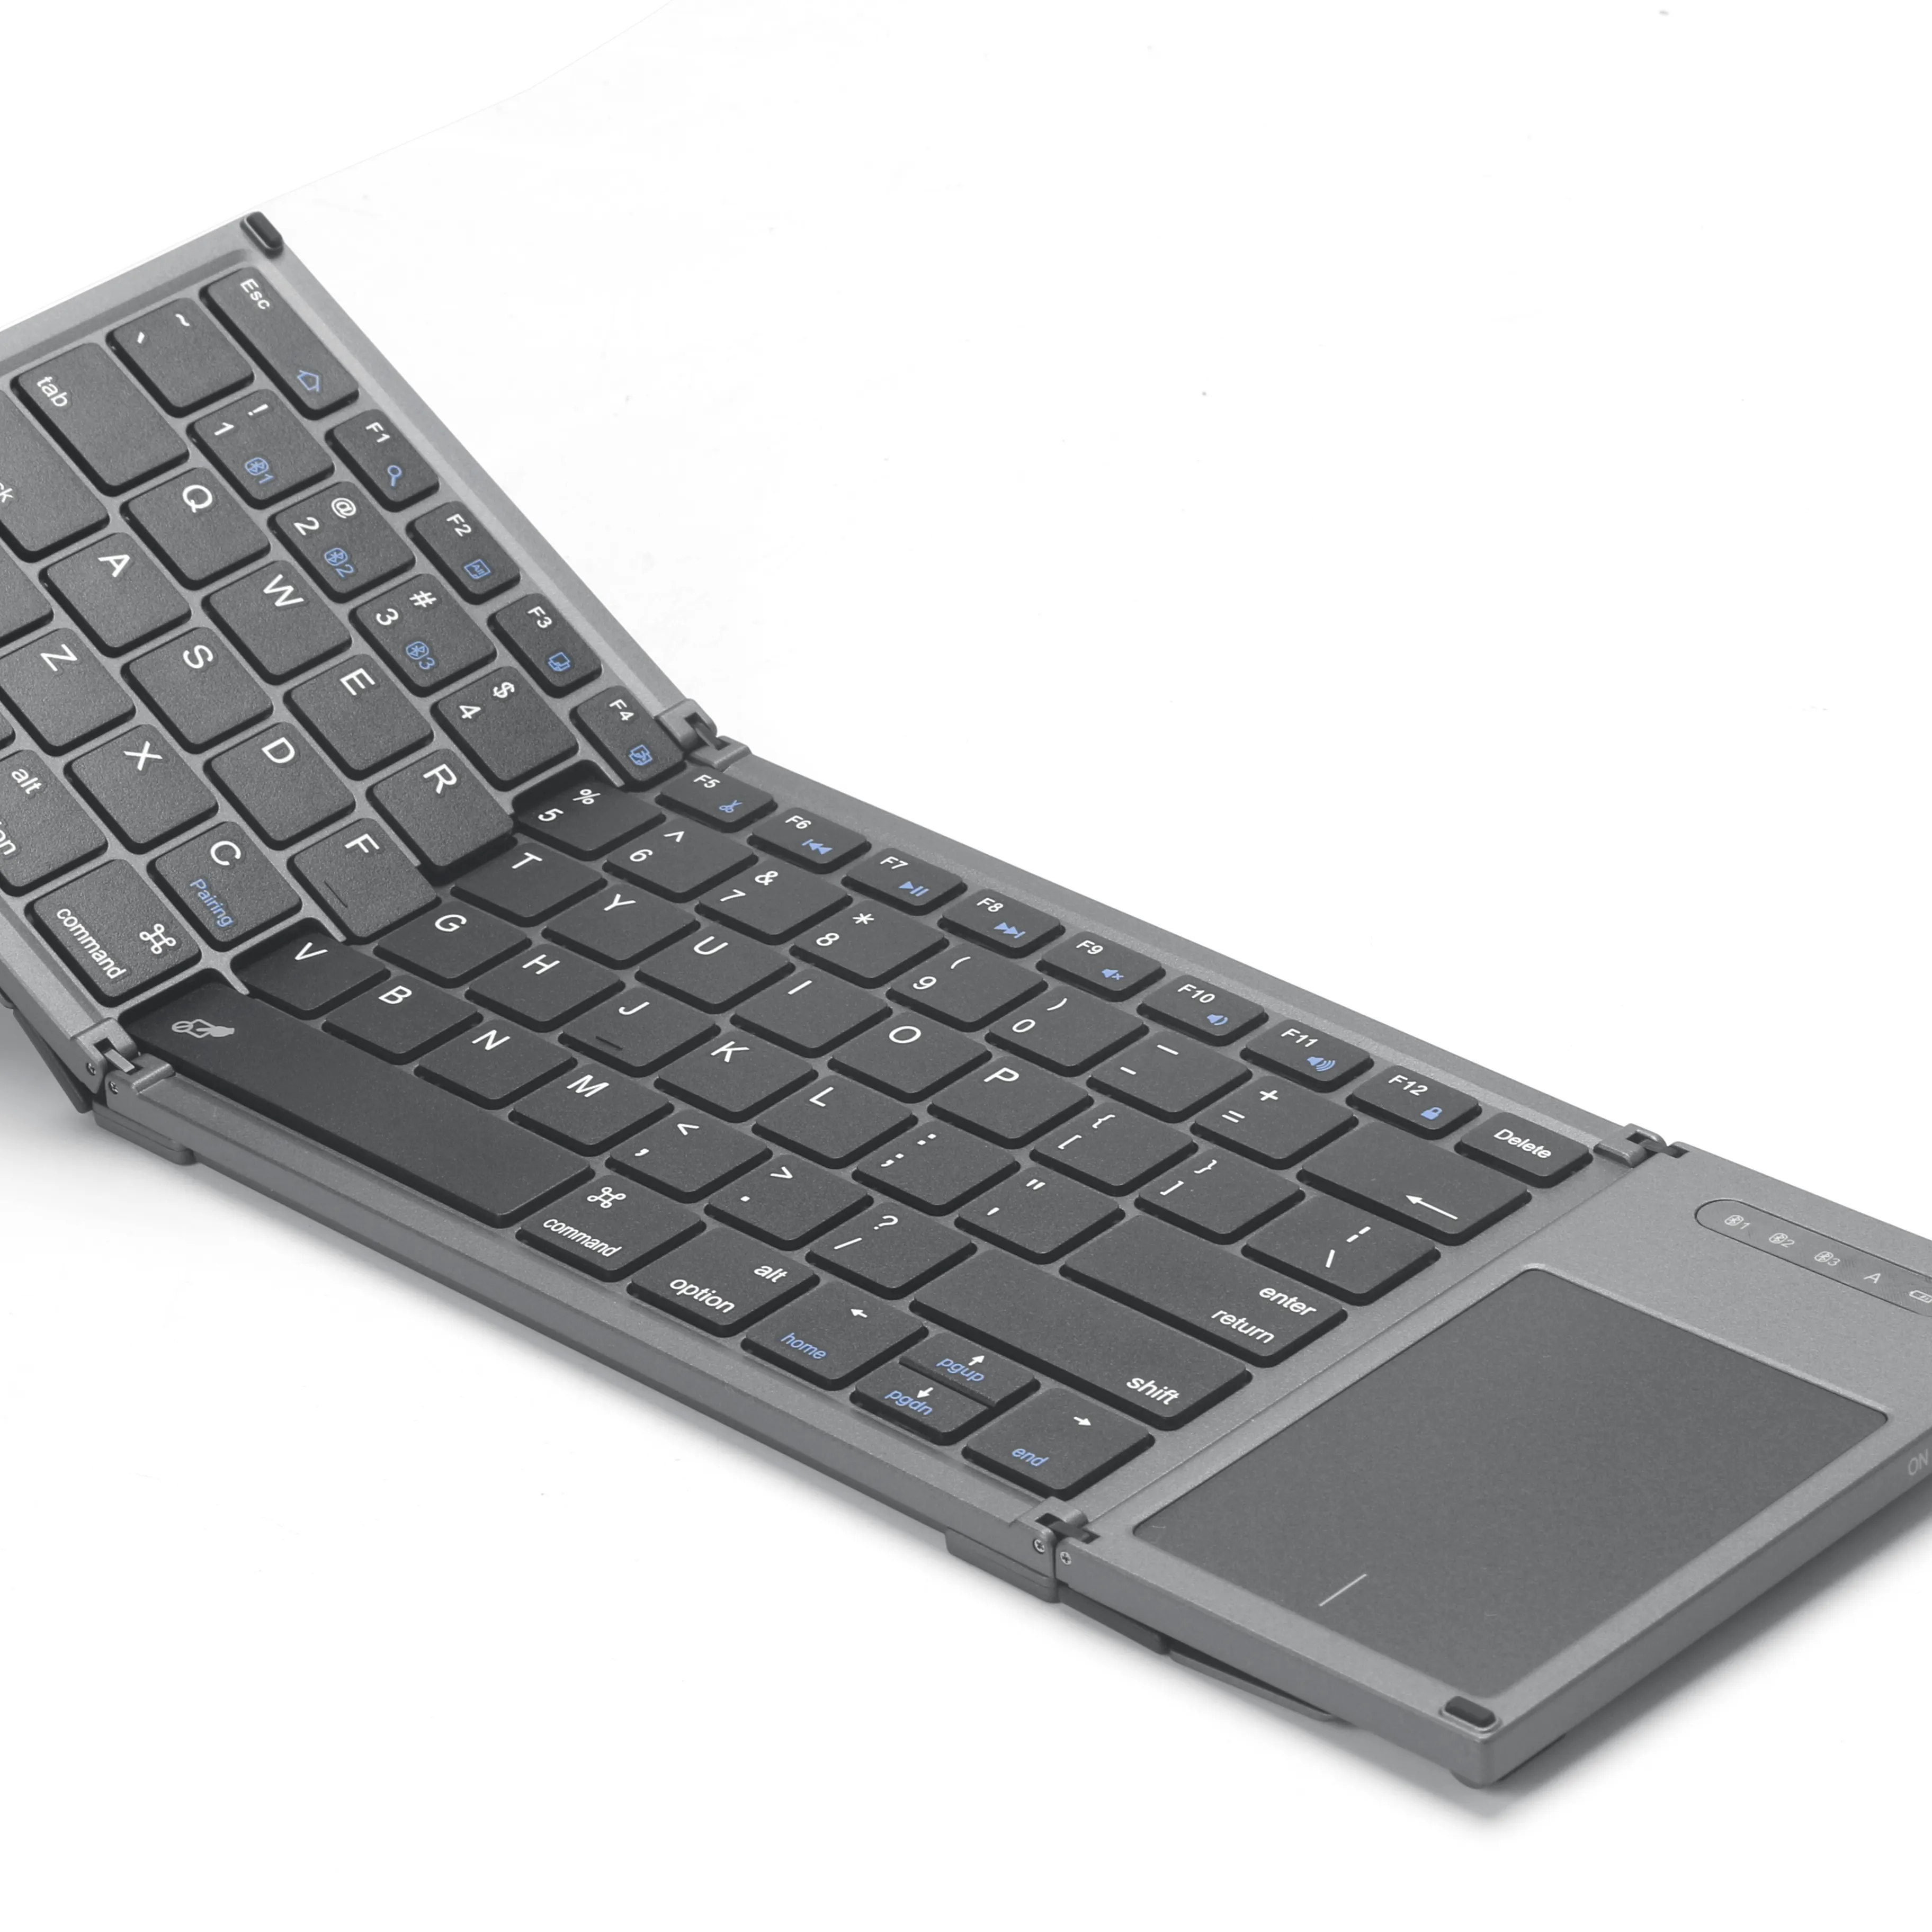 Foldable Bluetooth Keyboard Pocket Size Portable Mini BT Wireless Keyboard with Touch pad for Android, Windows, PC,